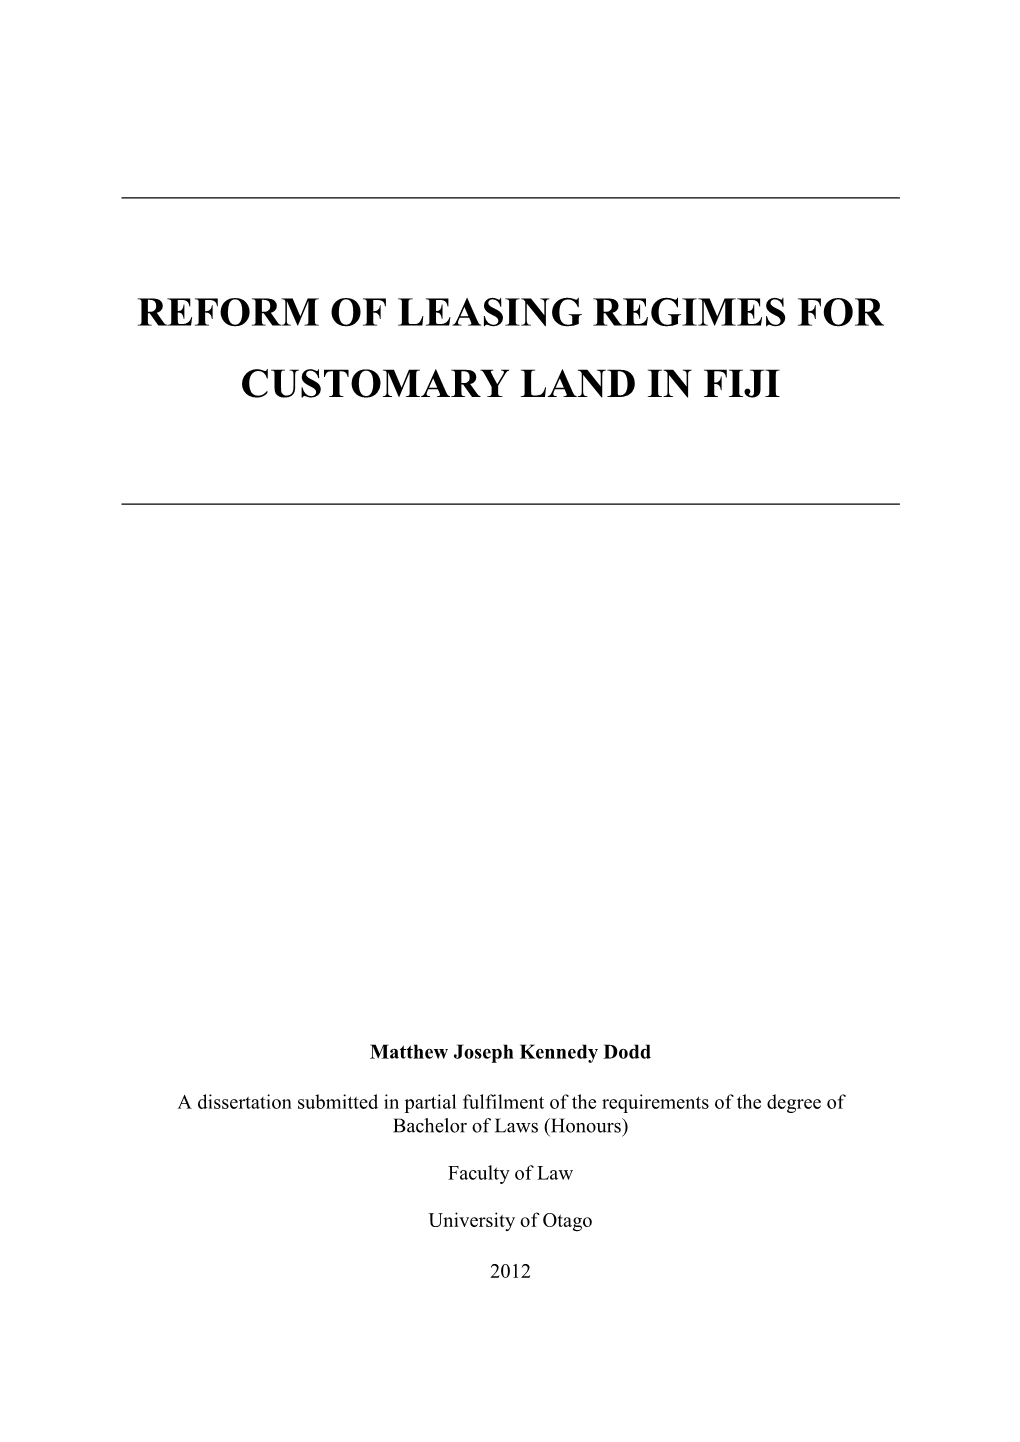 Reform of Leasing Regimes for Customary Land in Fiji